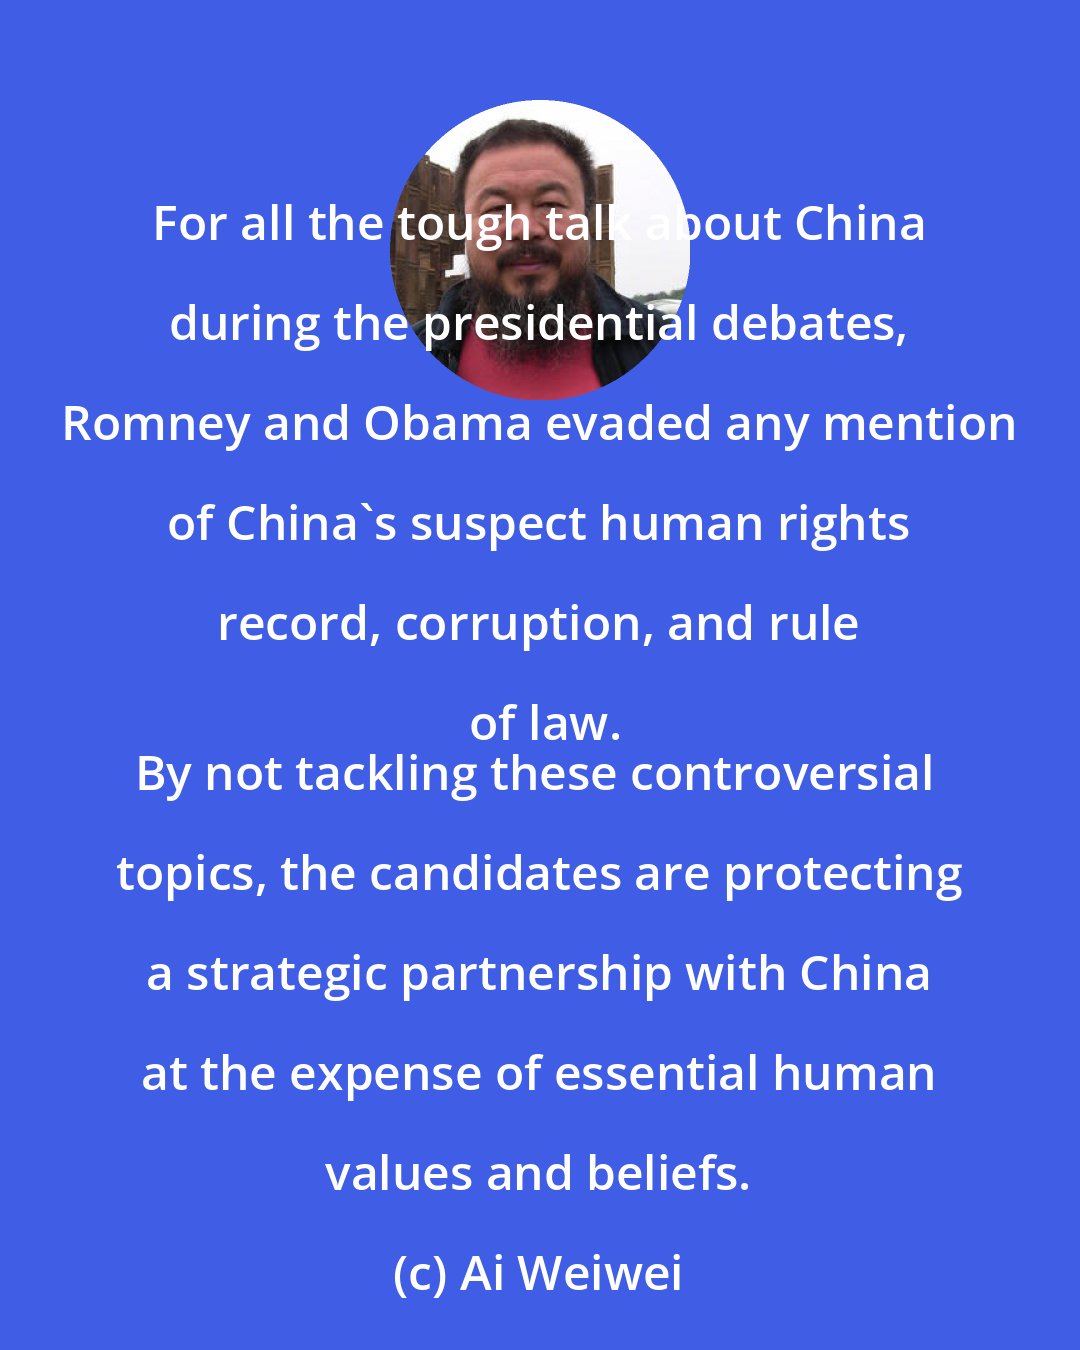 Ai Weiwei: For all the tough talk about China during the presidential debates, Romney and Obama evaded any mention of China's suspect human rights record, corruption, and rule of law.
By not tackling these controversial topics, the candidates are protecting a strategic partnership with China at the expense of essential human values and beliefs.